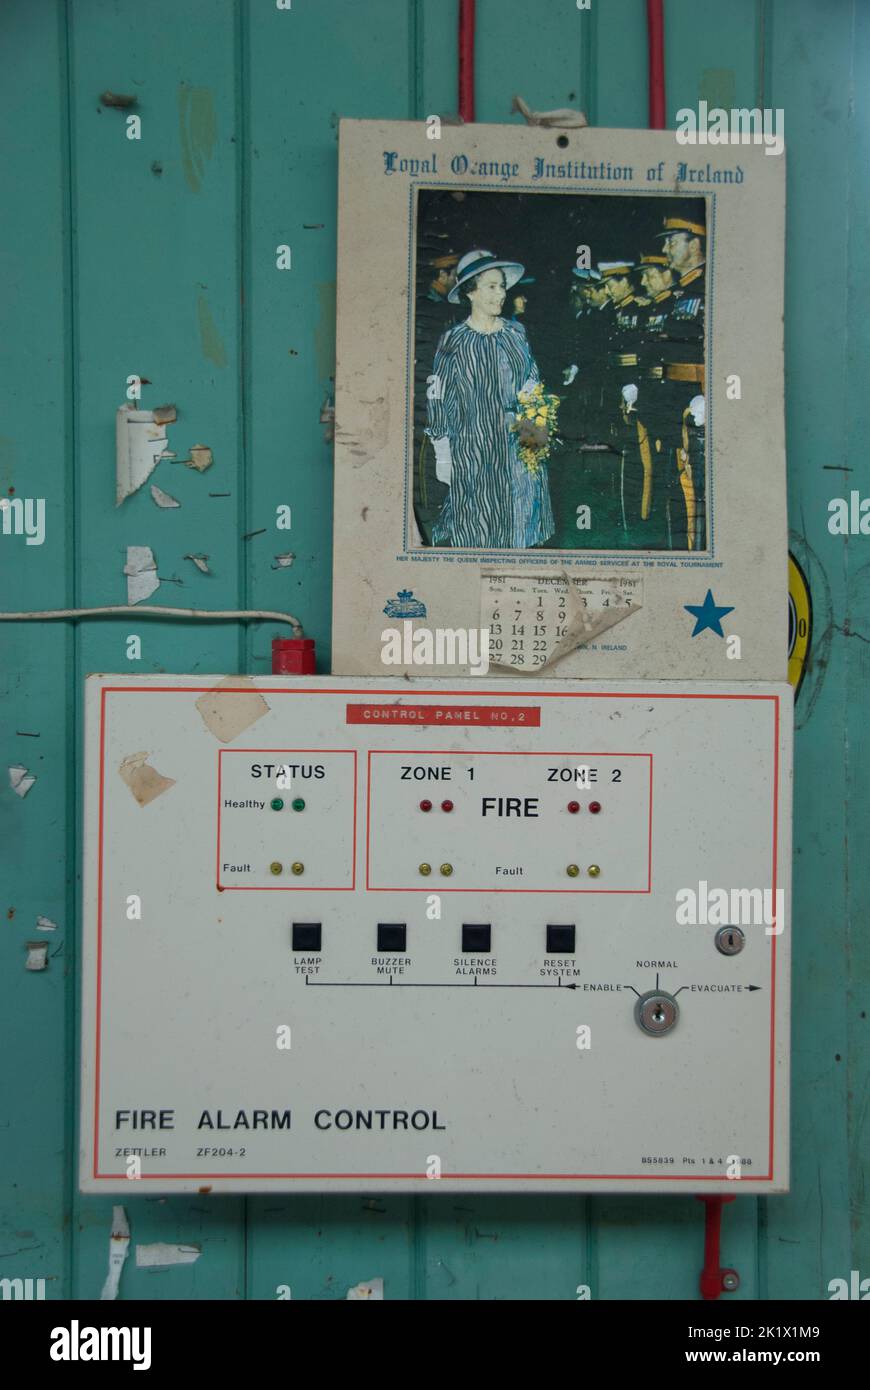 Fire alarm control panel with a calendar from the Loyal Orange Institution of Ireland showing the Queen's visit to Northern Ireland Stock Photo